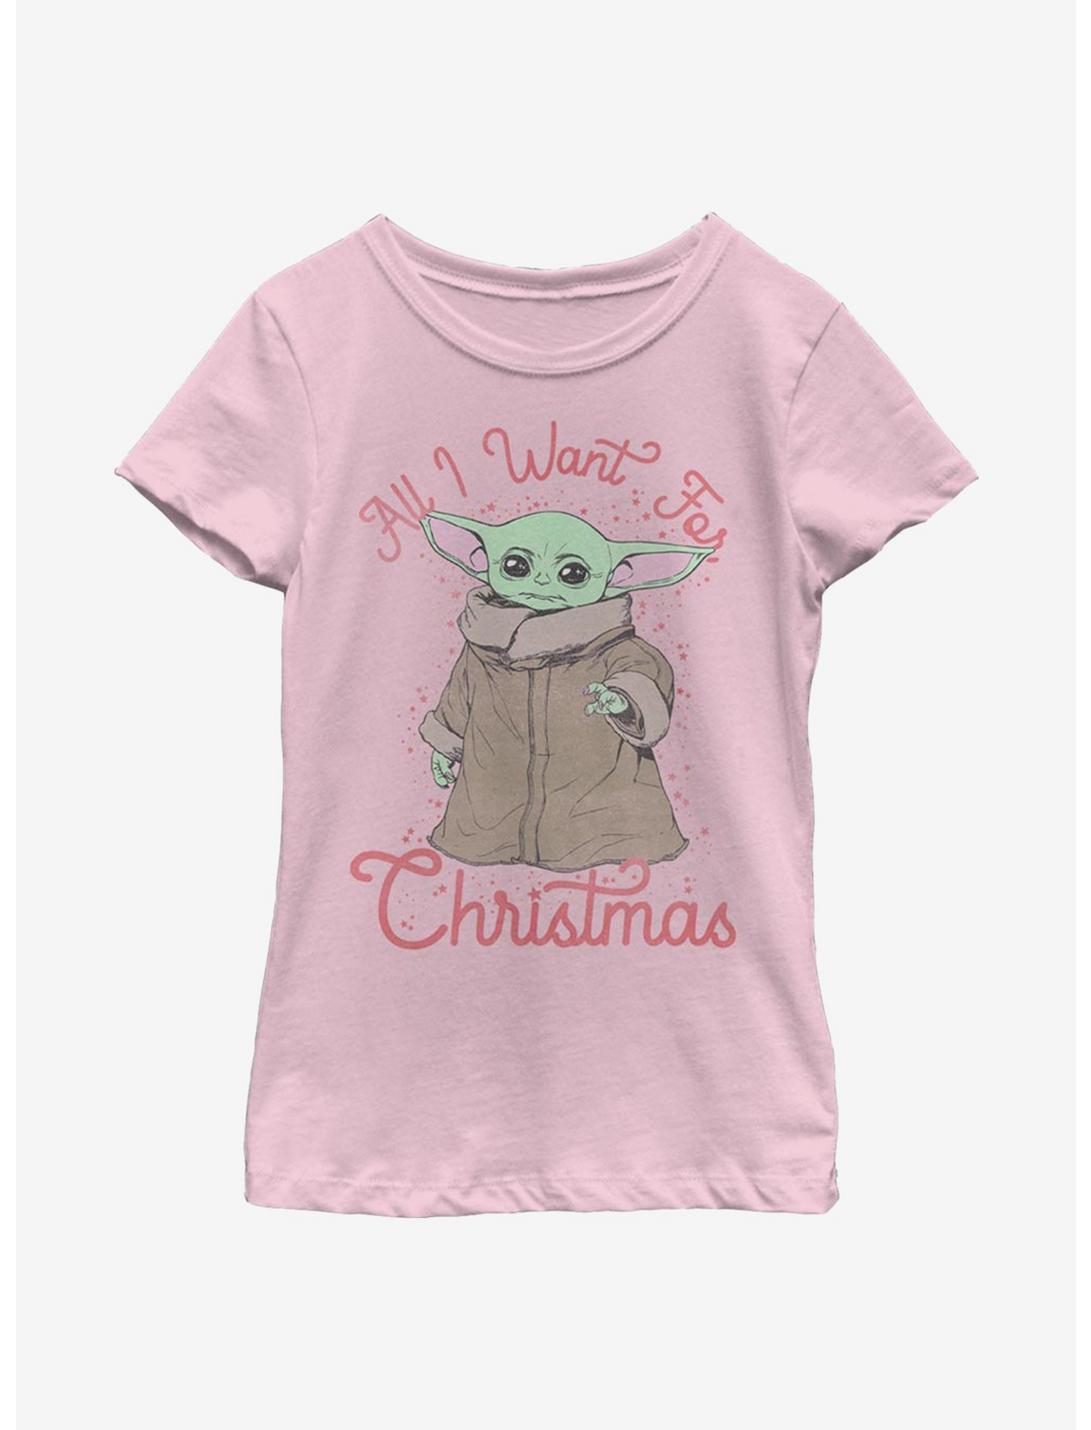 Star Wars The Mandalorian The Child All I Want Christmas Youth Girls T-Shirt, PINK, hi-res